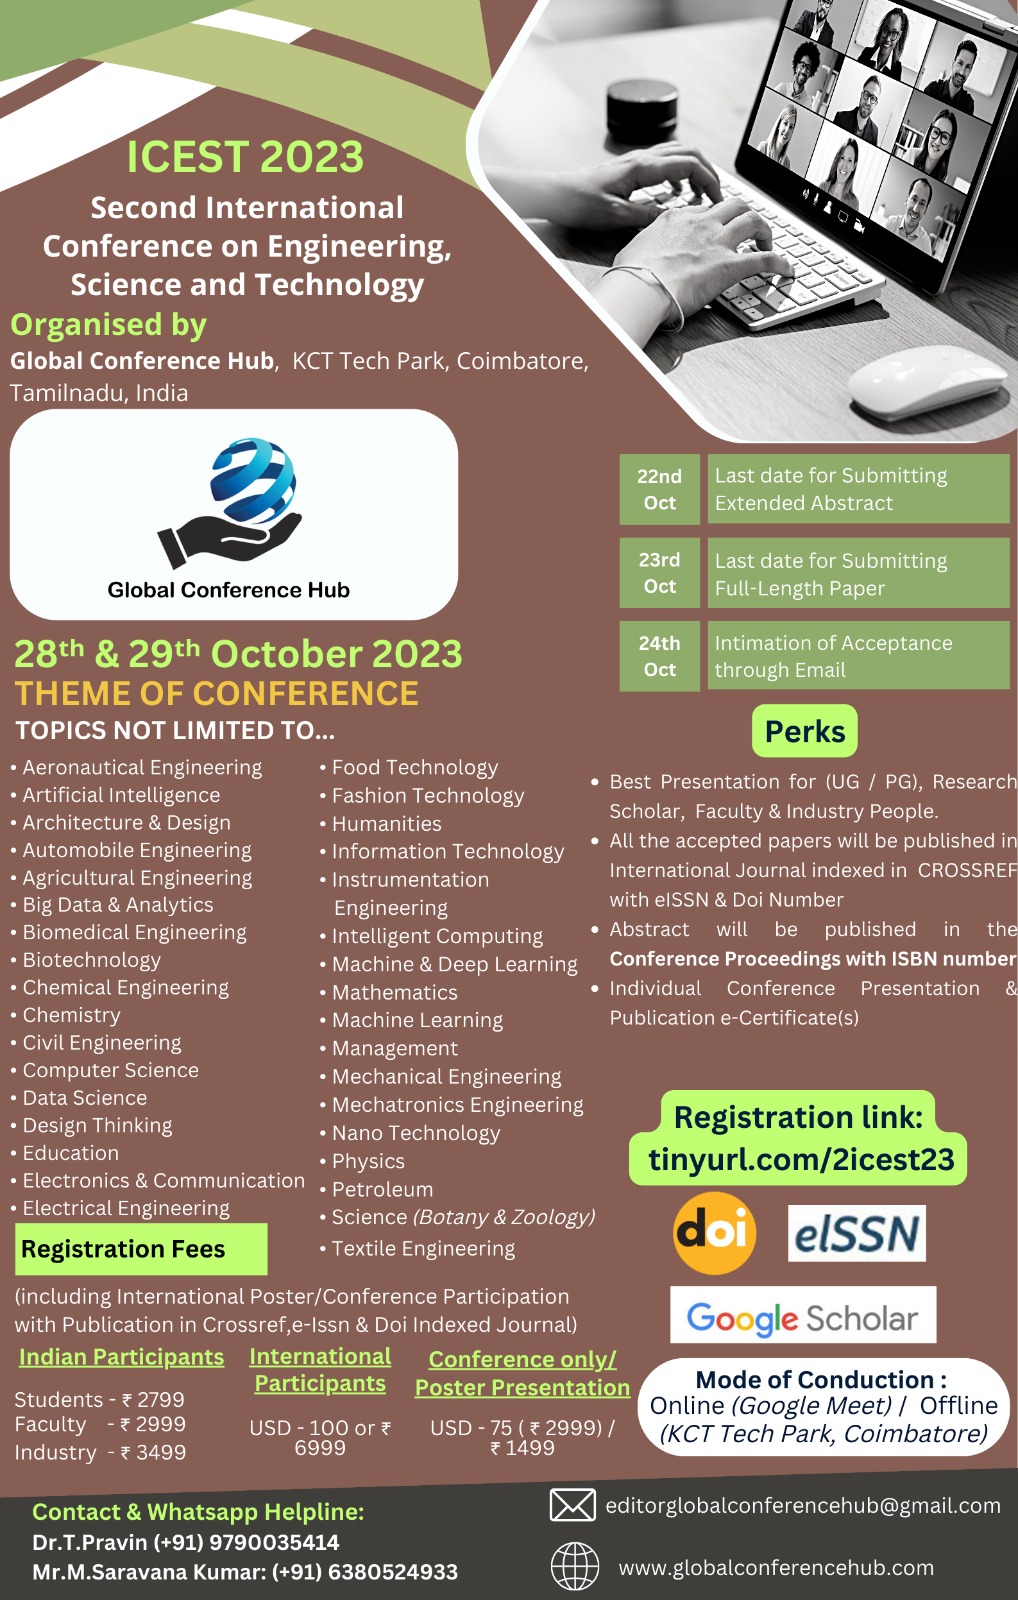 Second International Conference on Engineering, Science and Technology ICEST 2023